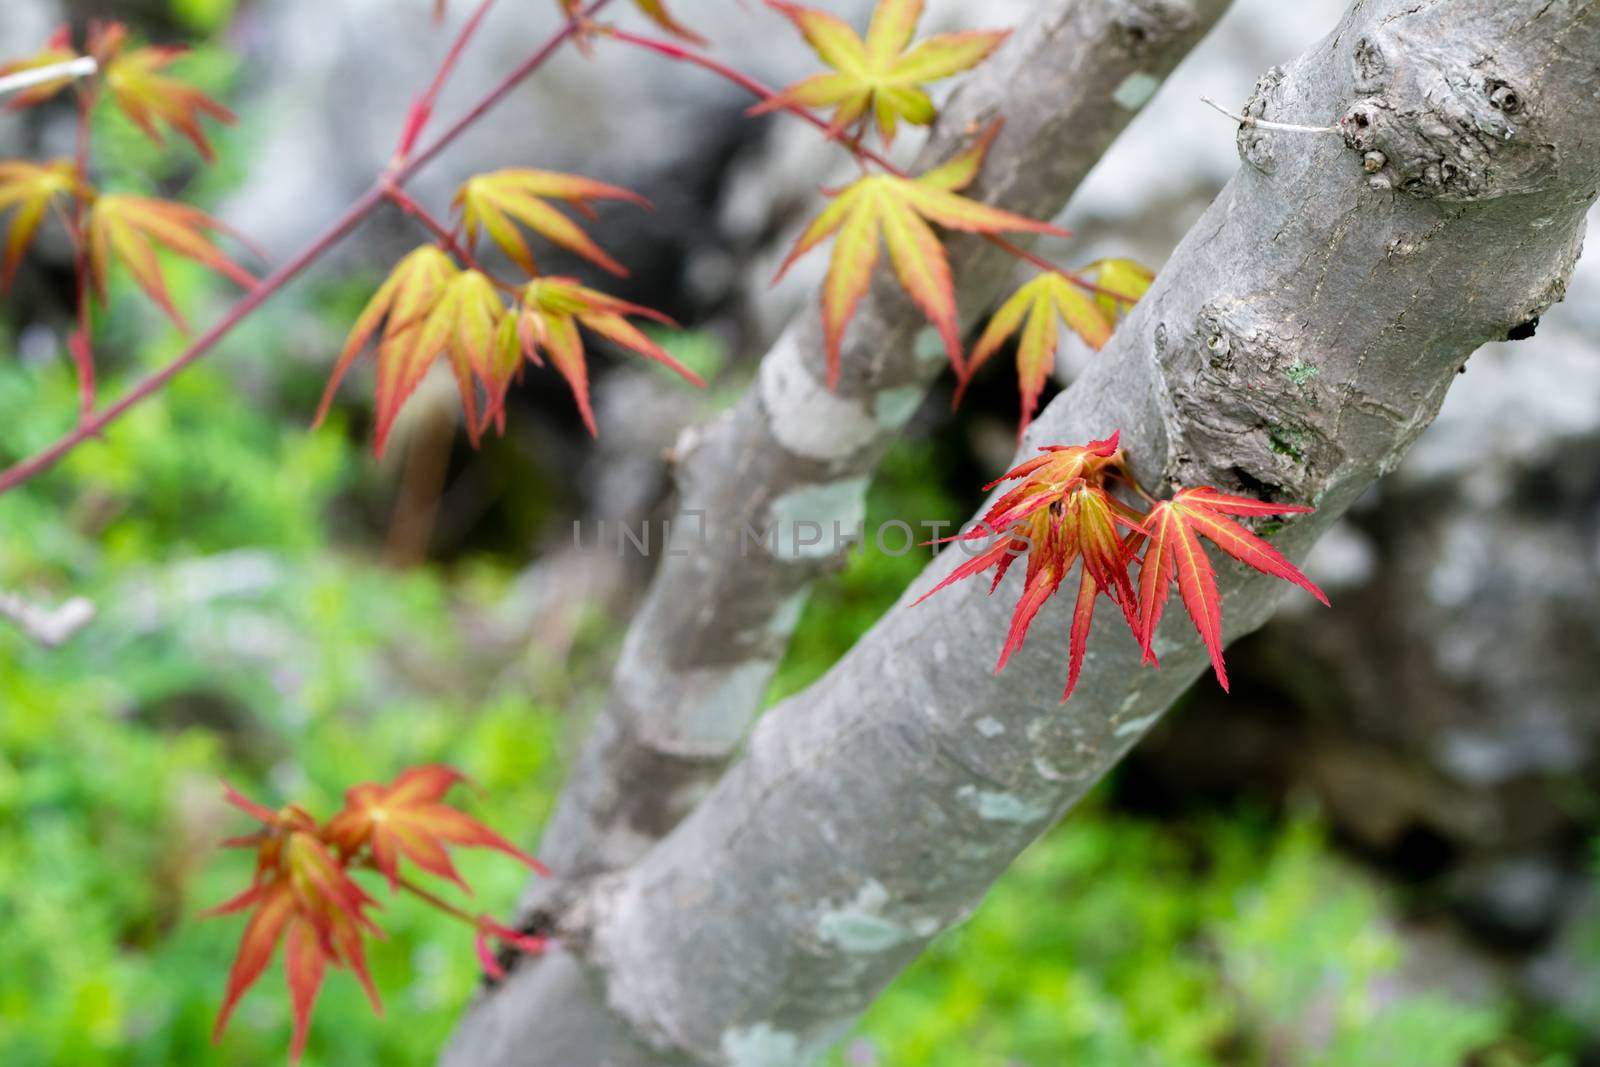 New leaves and branches growing out of the trunk of a Japanese maple tree in early spring.